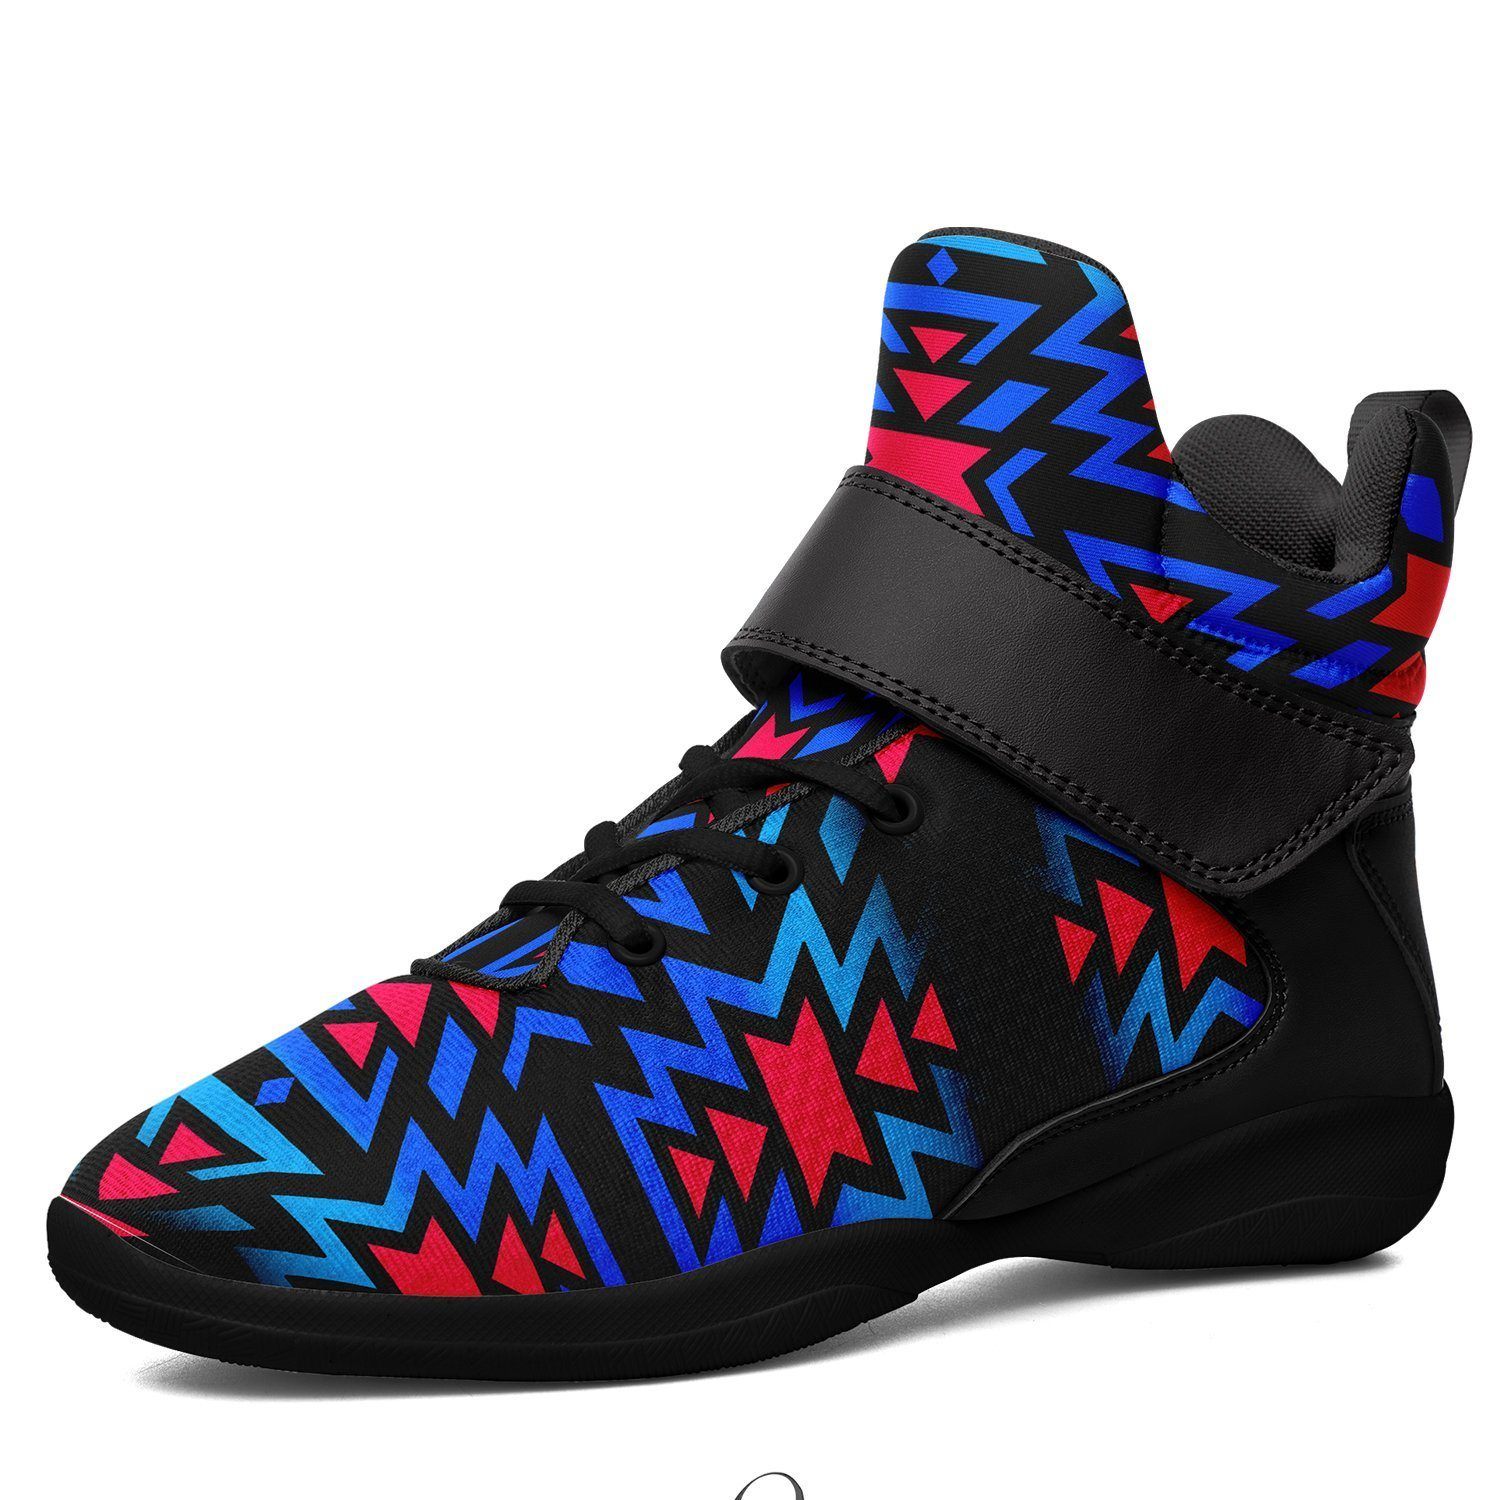 Black Fire Dragonfly Ipottaa Basketball / Sport High Top Shoes - Black Sole 49 Dzine US Men 7 / EUR 40 Black Sole with Black Strap 